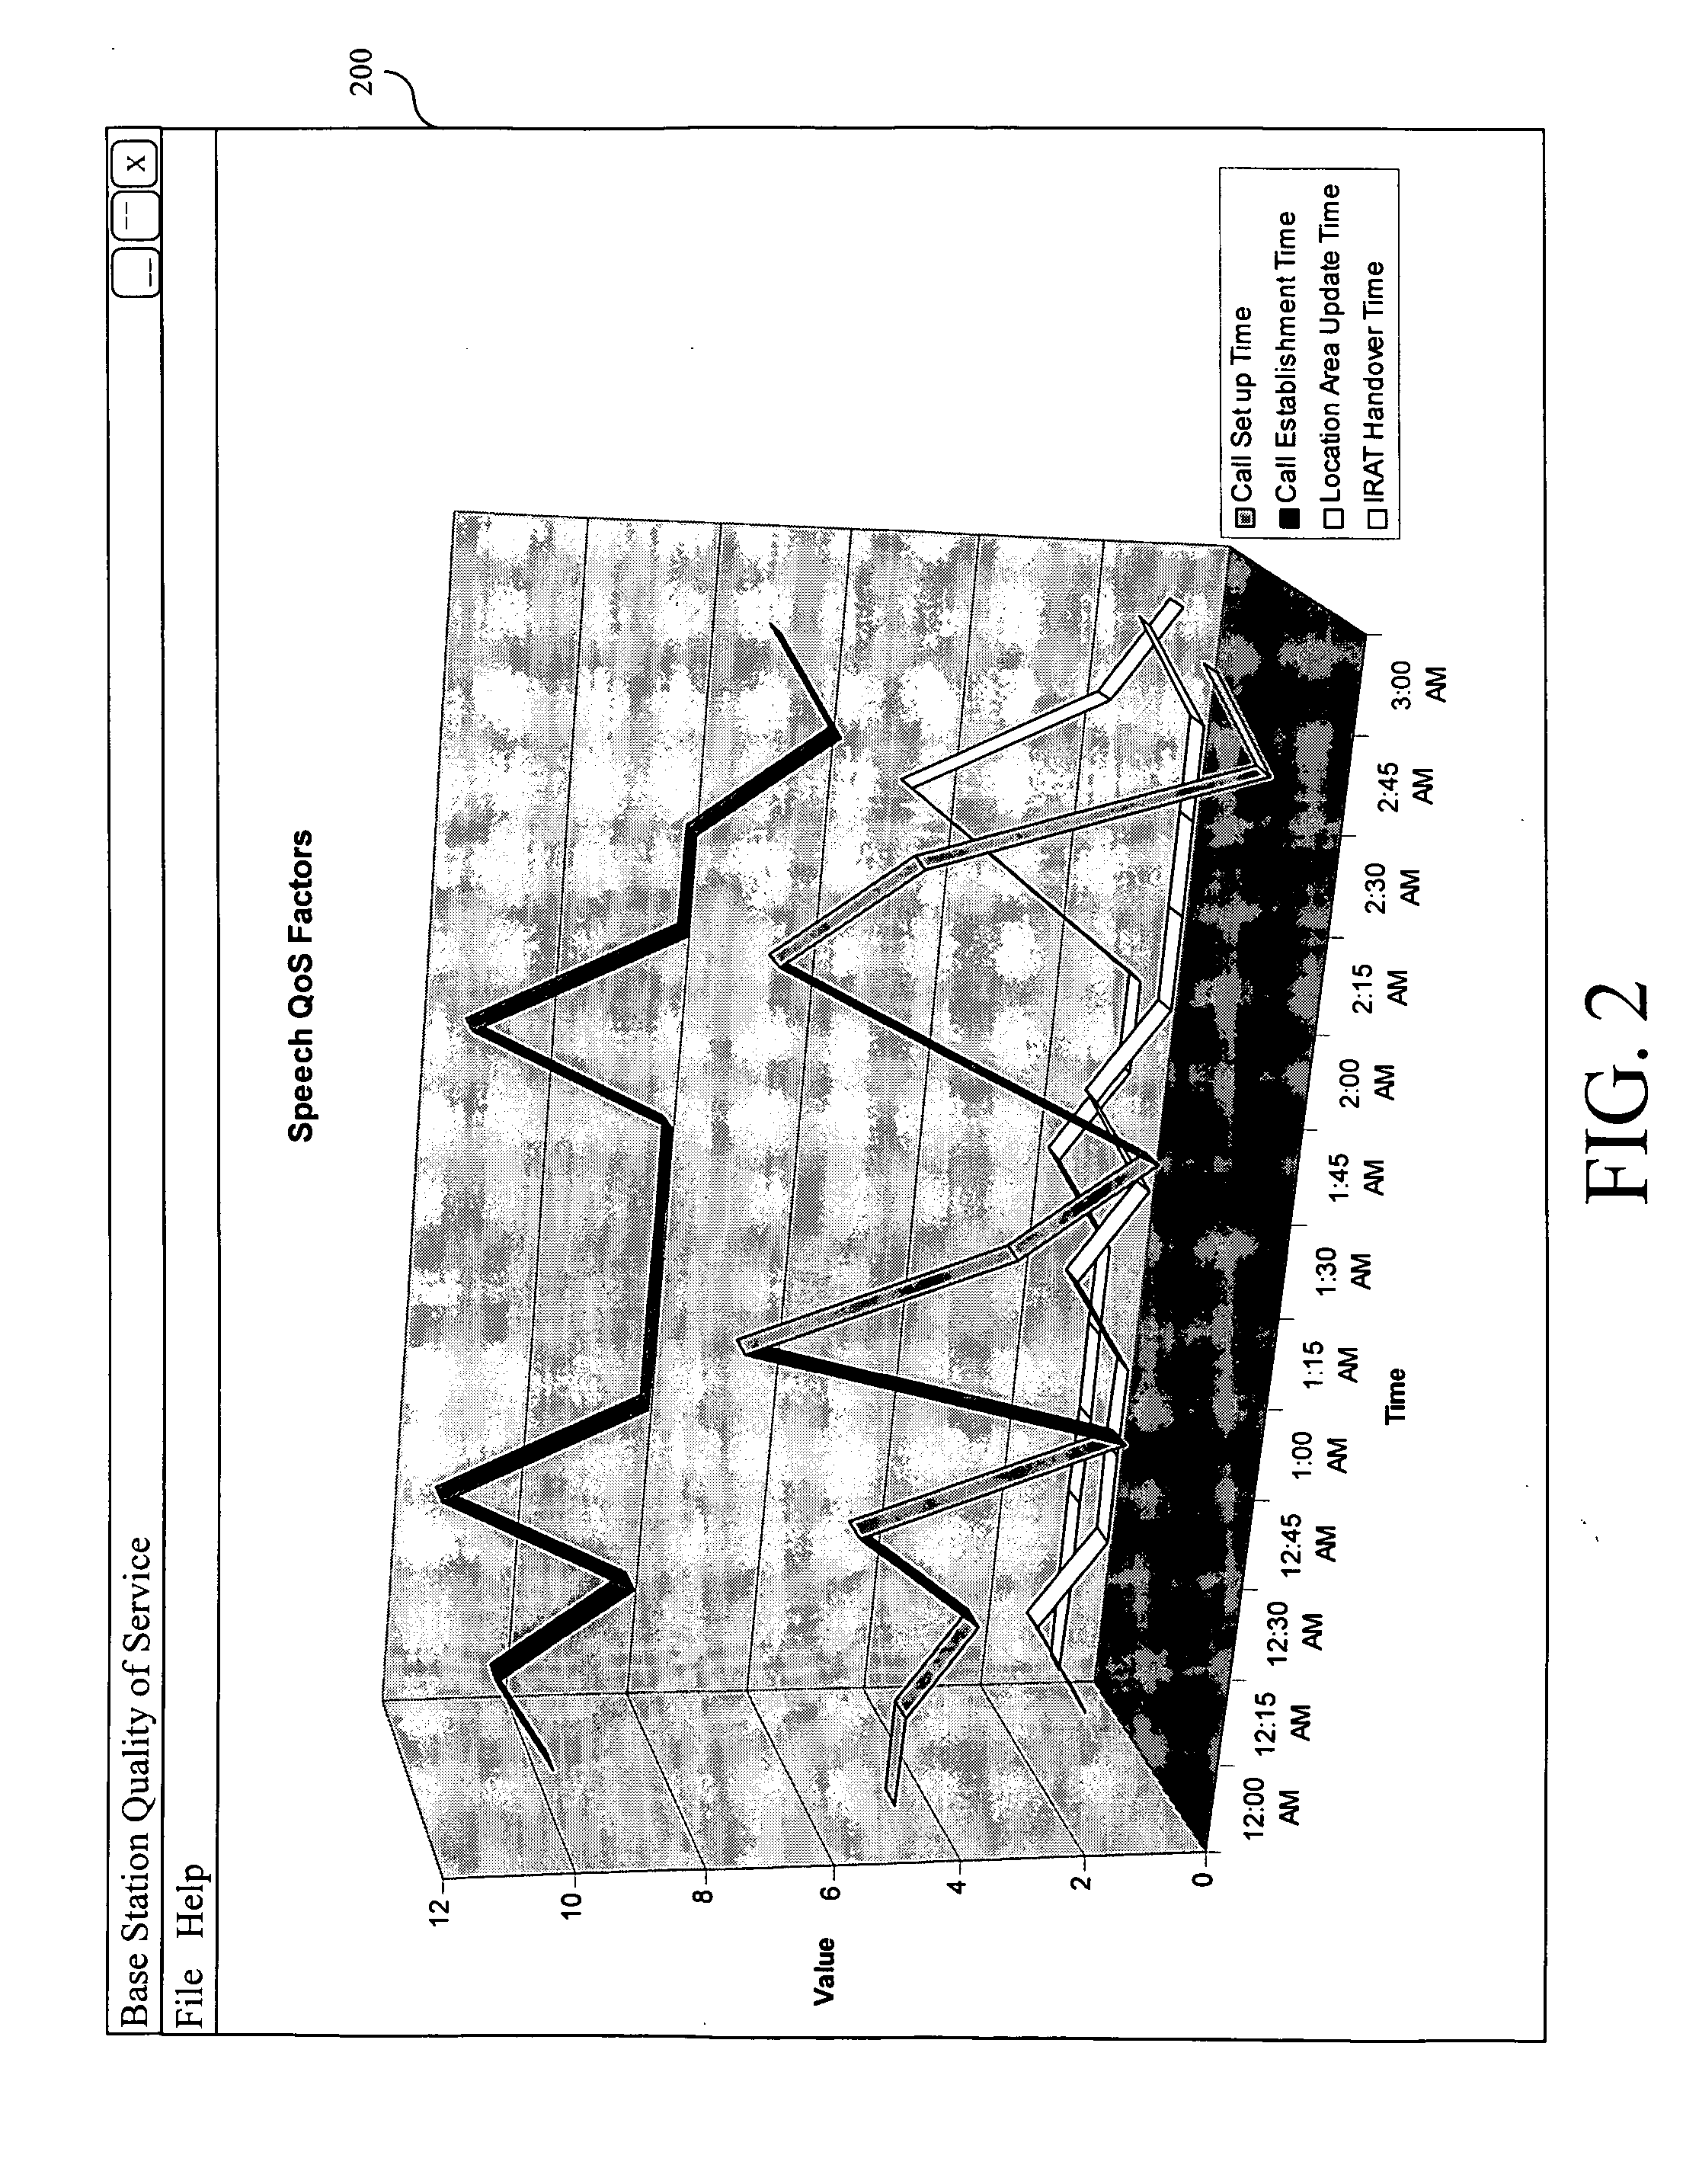 Method and apparatus for depicting quality of service in mobile networks